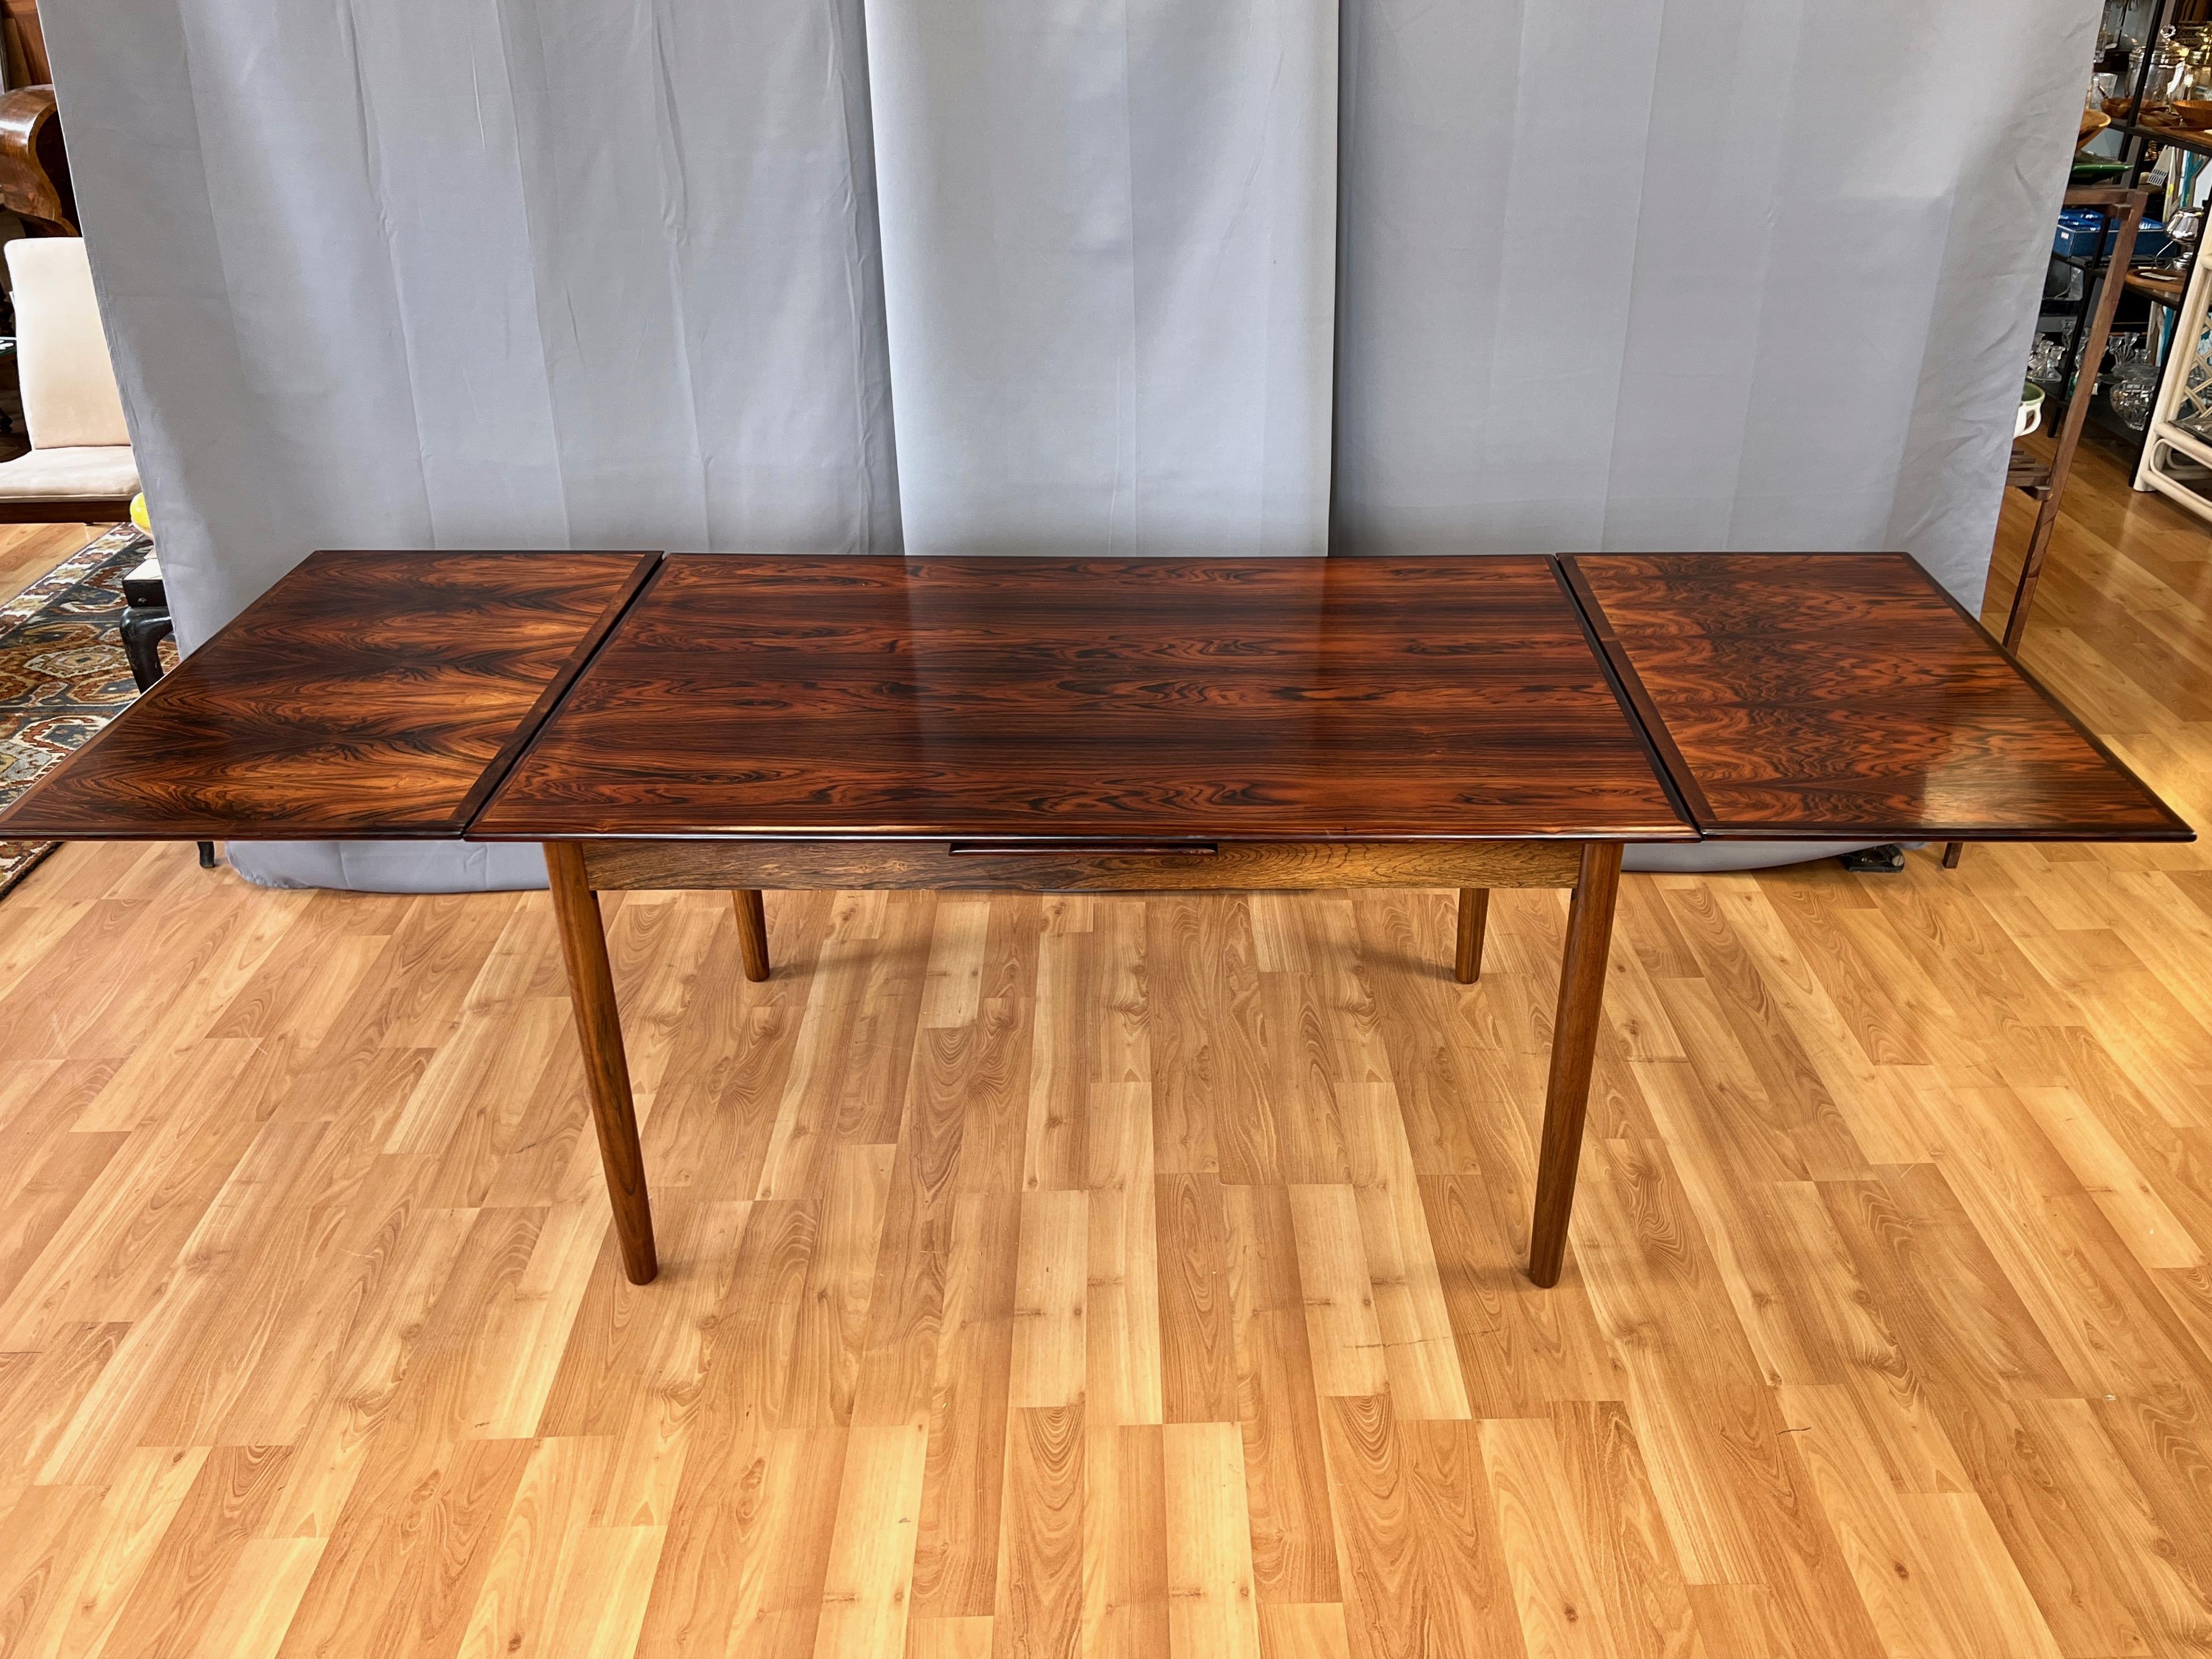 An exceptionally striking and expansive 1960s Scandinavian rosewood extendable draw leaf dining table. 

Classic and clean vintage Scandinavian Modern lines. Notable for the bookmatched rosewood veneer top, which displays incredibly dynamic and